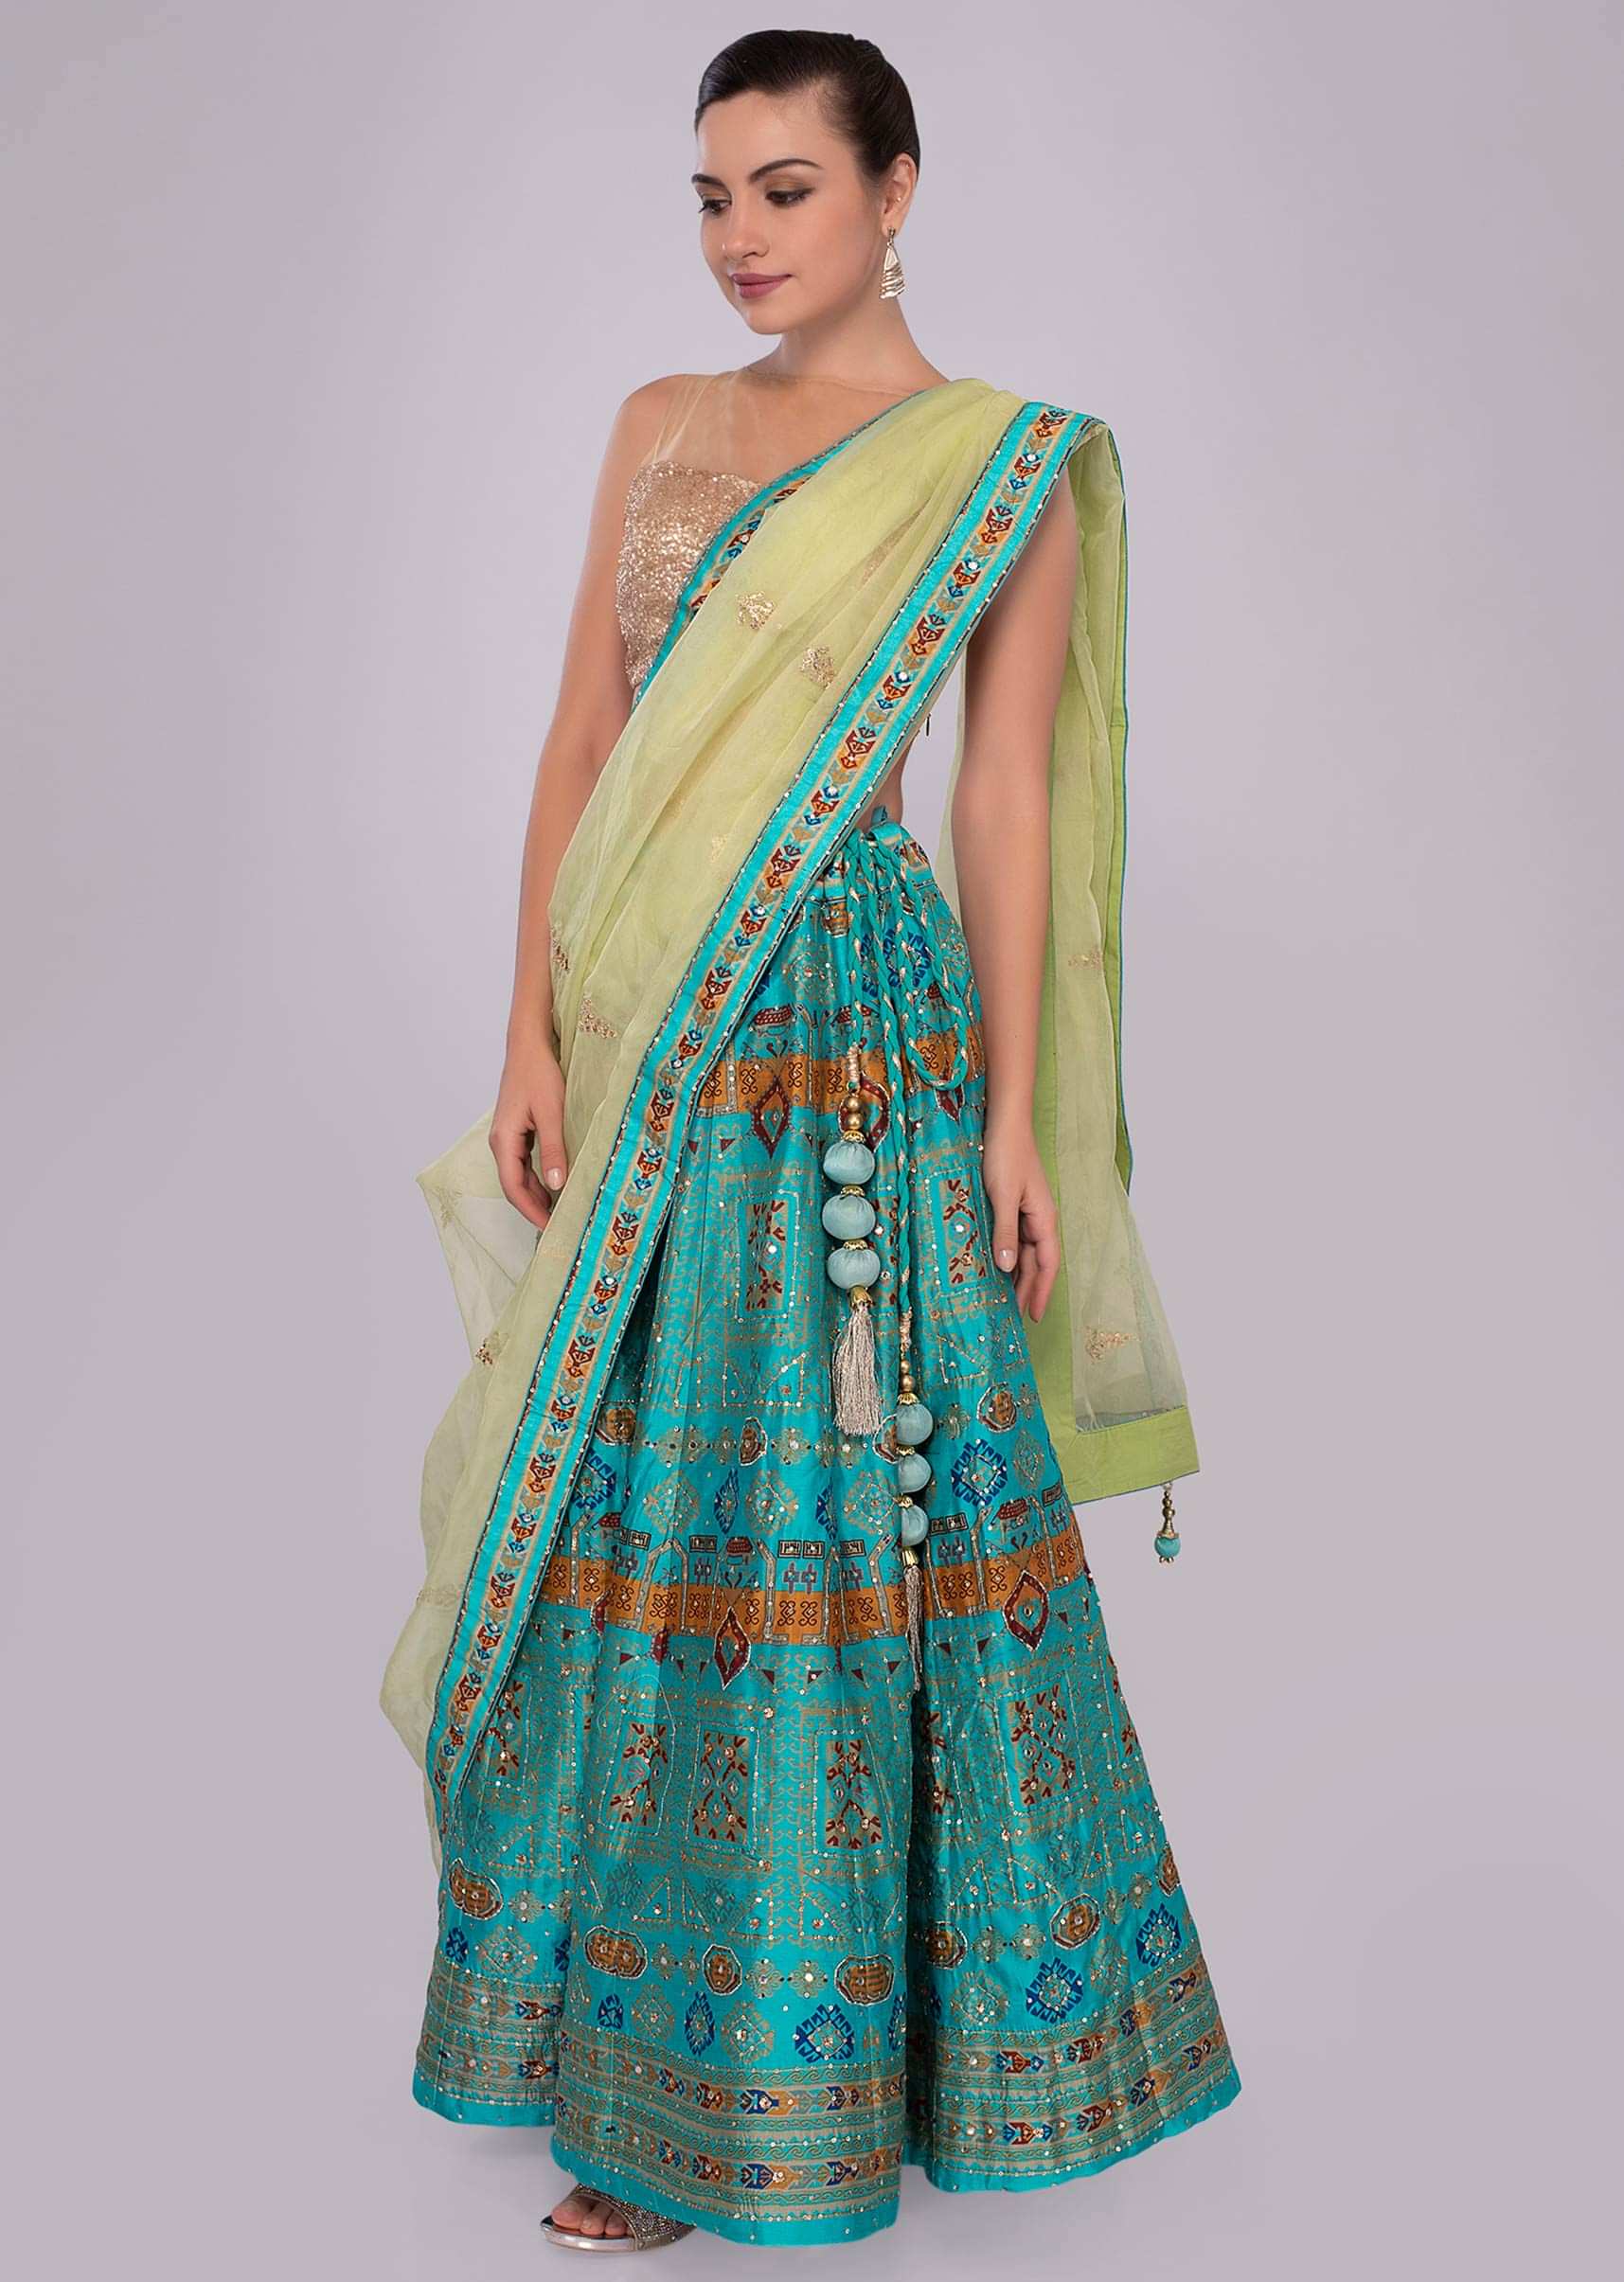 Turq blue cotton lehenga with antique print and embroidery